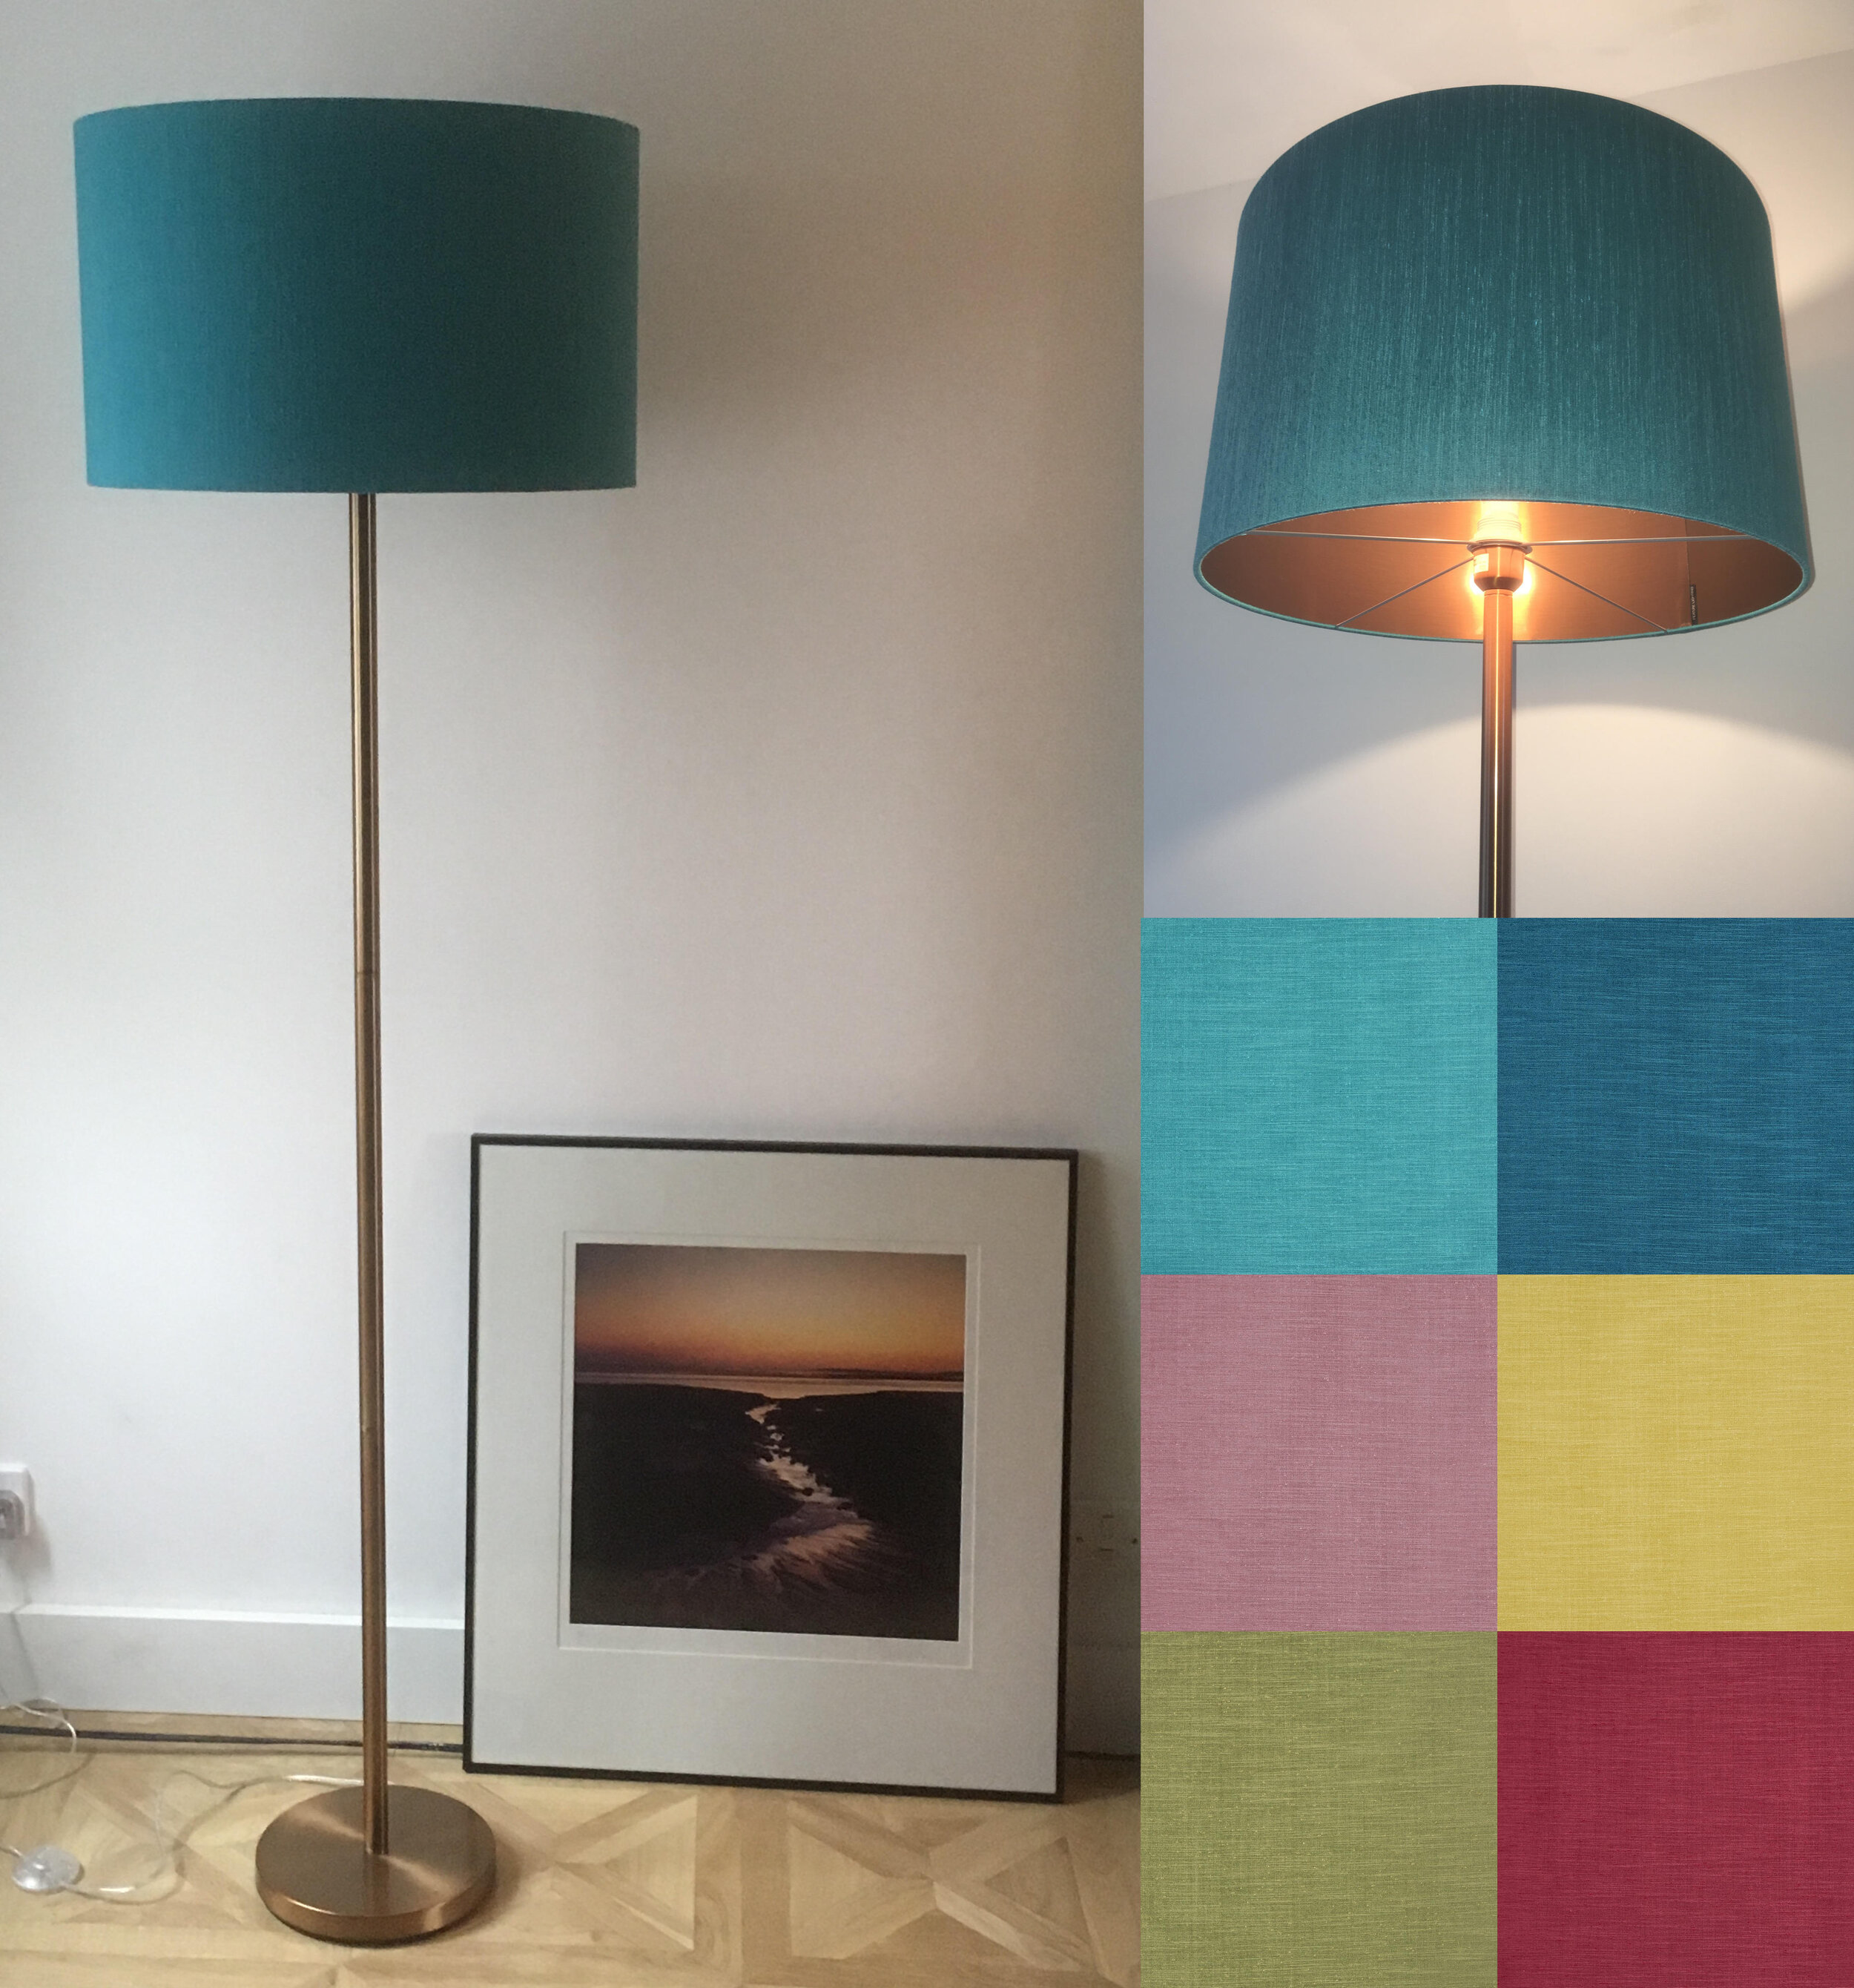 Lamp Shade Gallery Feature Lighting, Large Lamp Shades For Standard Lamps Uk